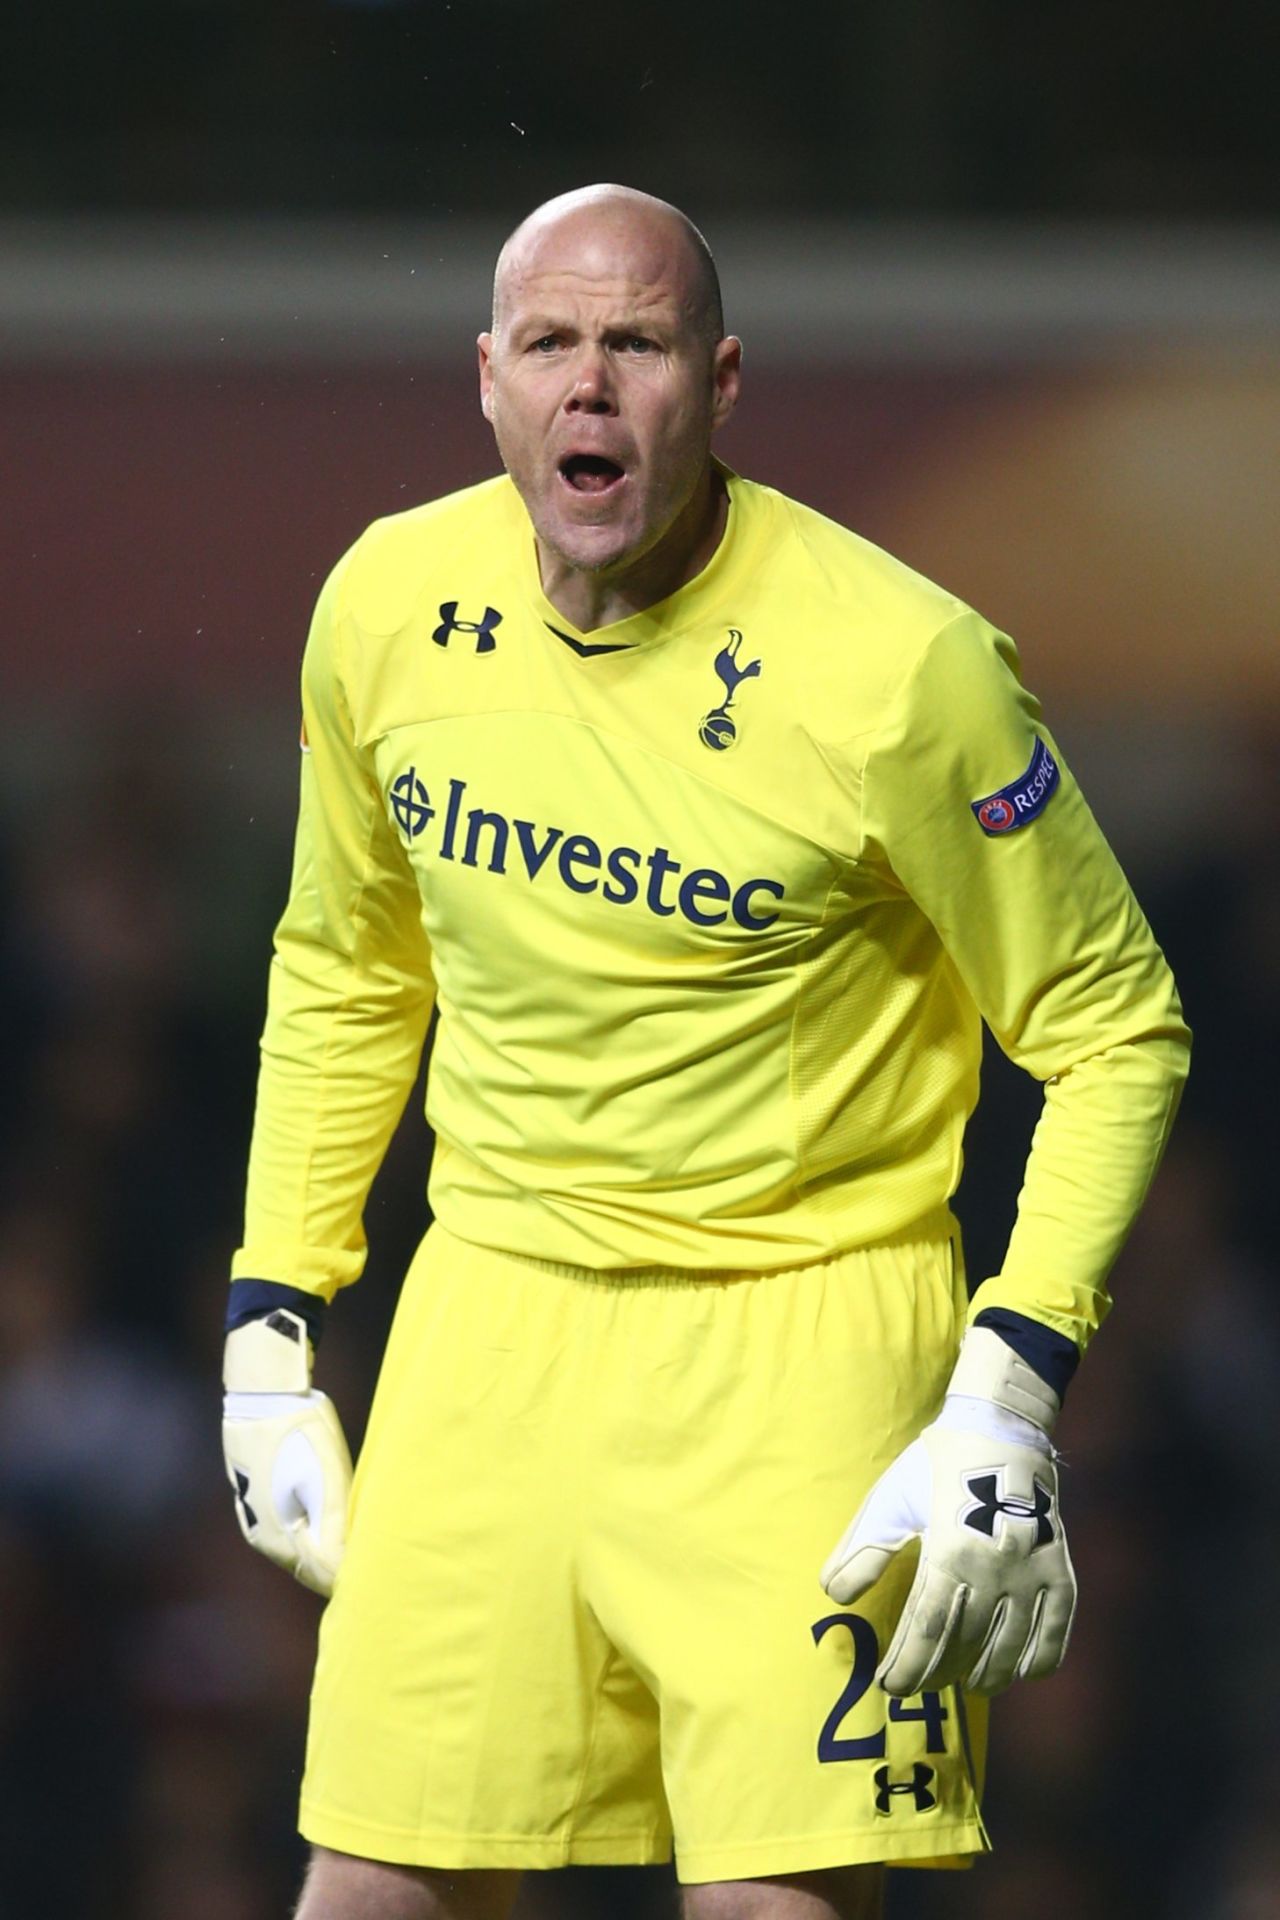 U.S. goalkeeper Brad Friedel retired from professional football in 2015 at the age of 43. He spent the majority of his 21-year career in the Premier League, playing for Liverpool, Blackburn Rovers, Aston Villa and Tottenham. The Ohio-born keeper also made 82 appearances for his country.